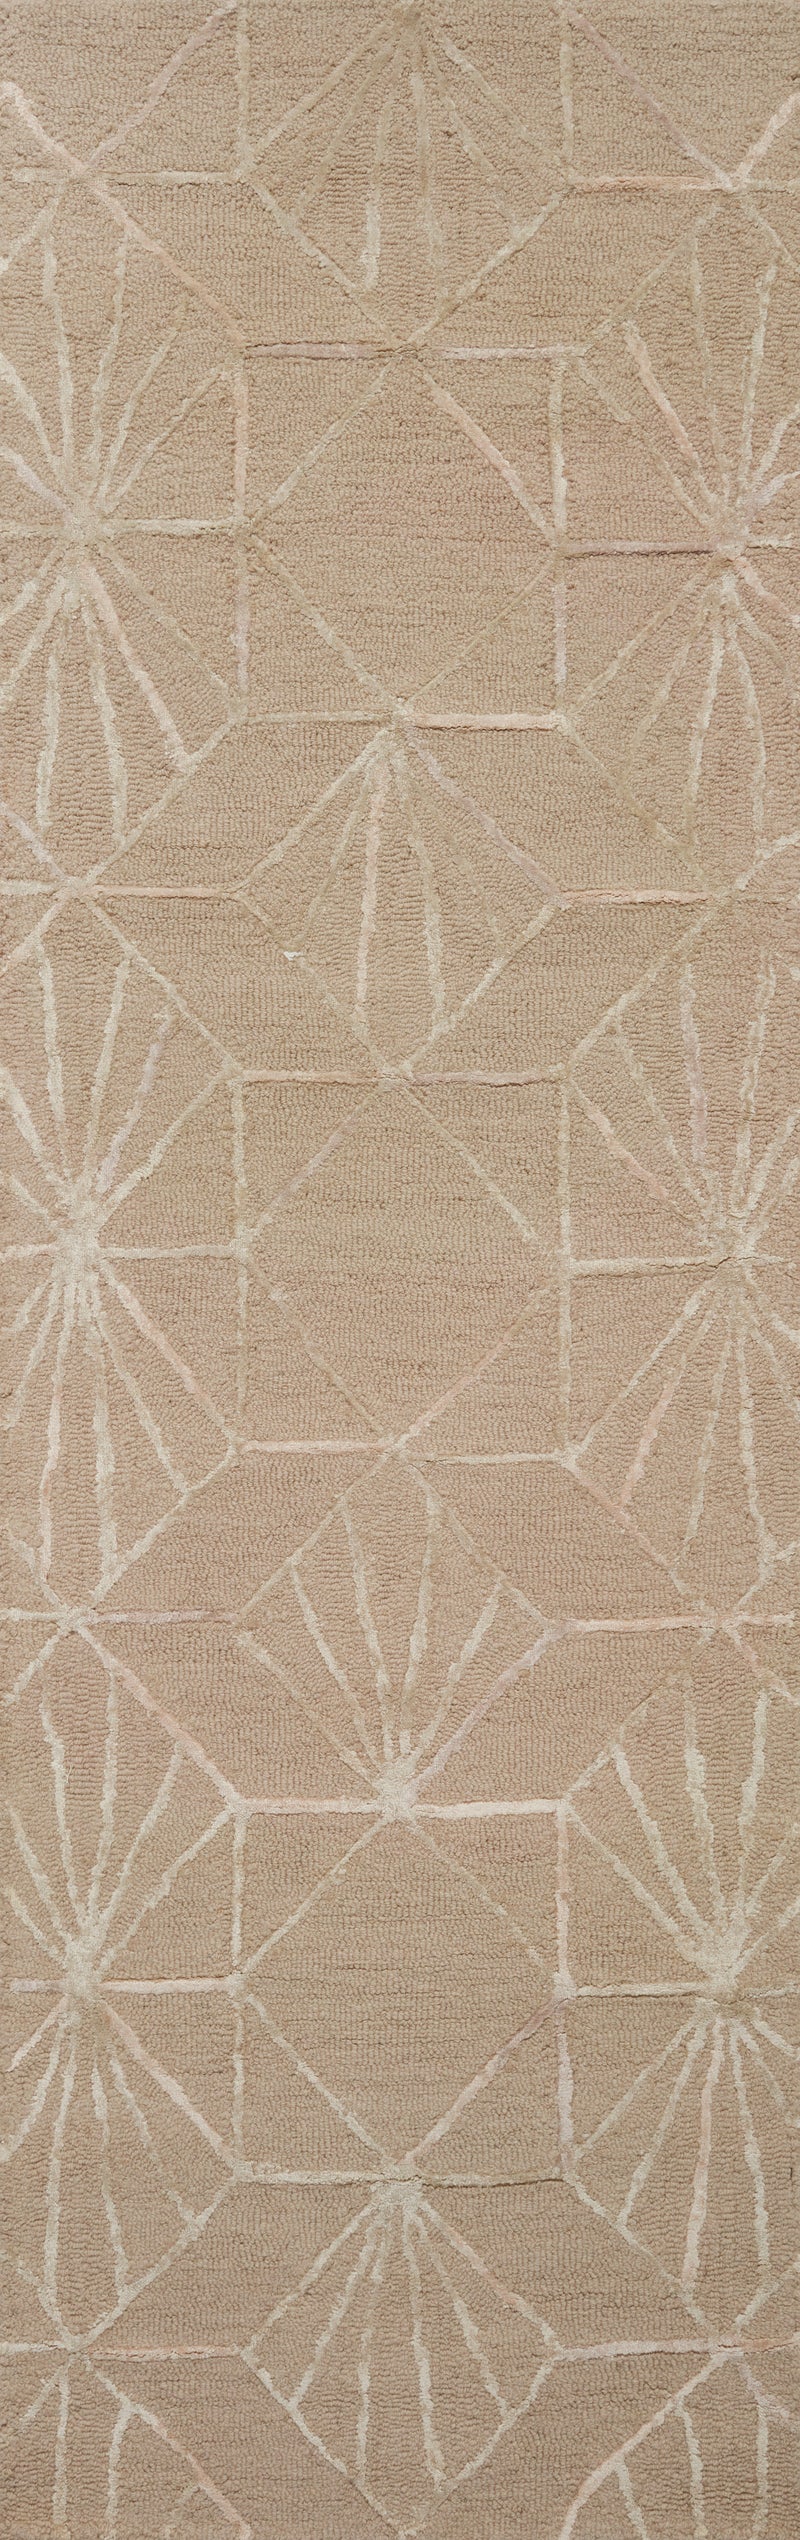 VERVE Collection Rug  in  Sand / Blush Beige Accent Hand-Tufted Jute/Wool